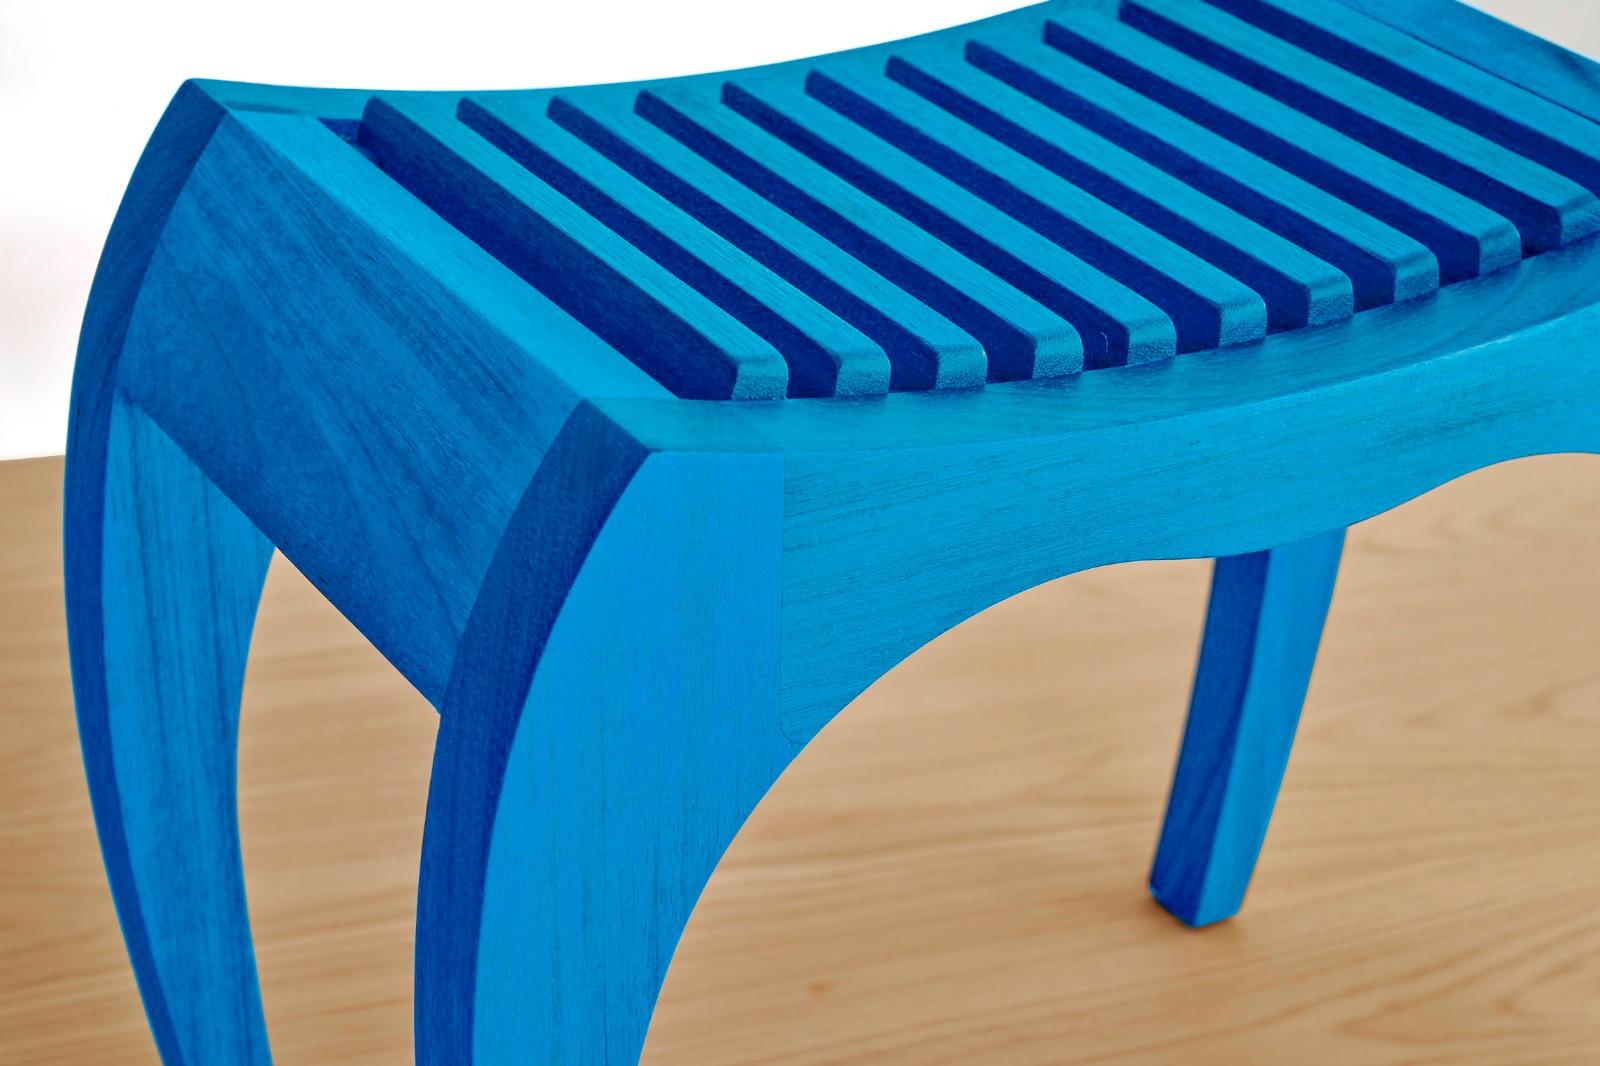 Blue stool rumbo by Jean-Baptiste Van den Heede
Signed and numbered
Dimensions: L 45 x W 31 x H 40 cm
Materials: maple wood

Also available in solid cherrywood and other woods on demand.

The RUMBO stool is a unique, limited series design and